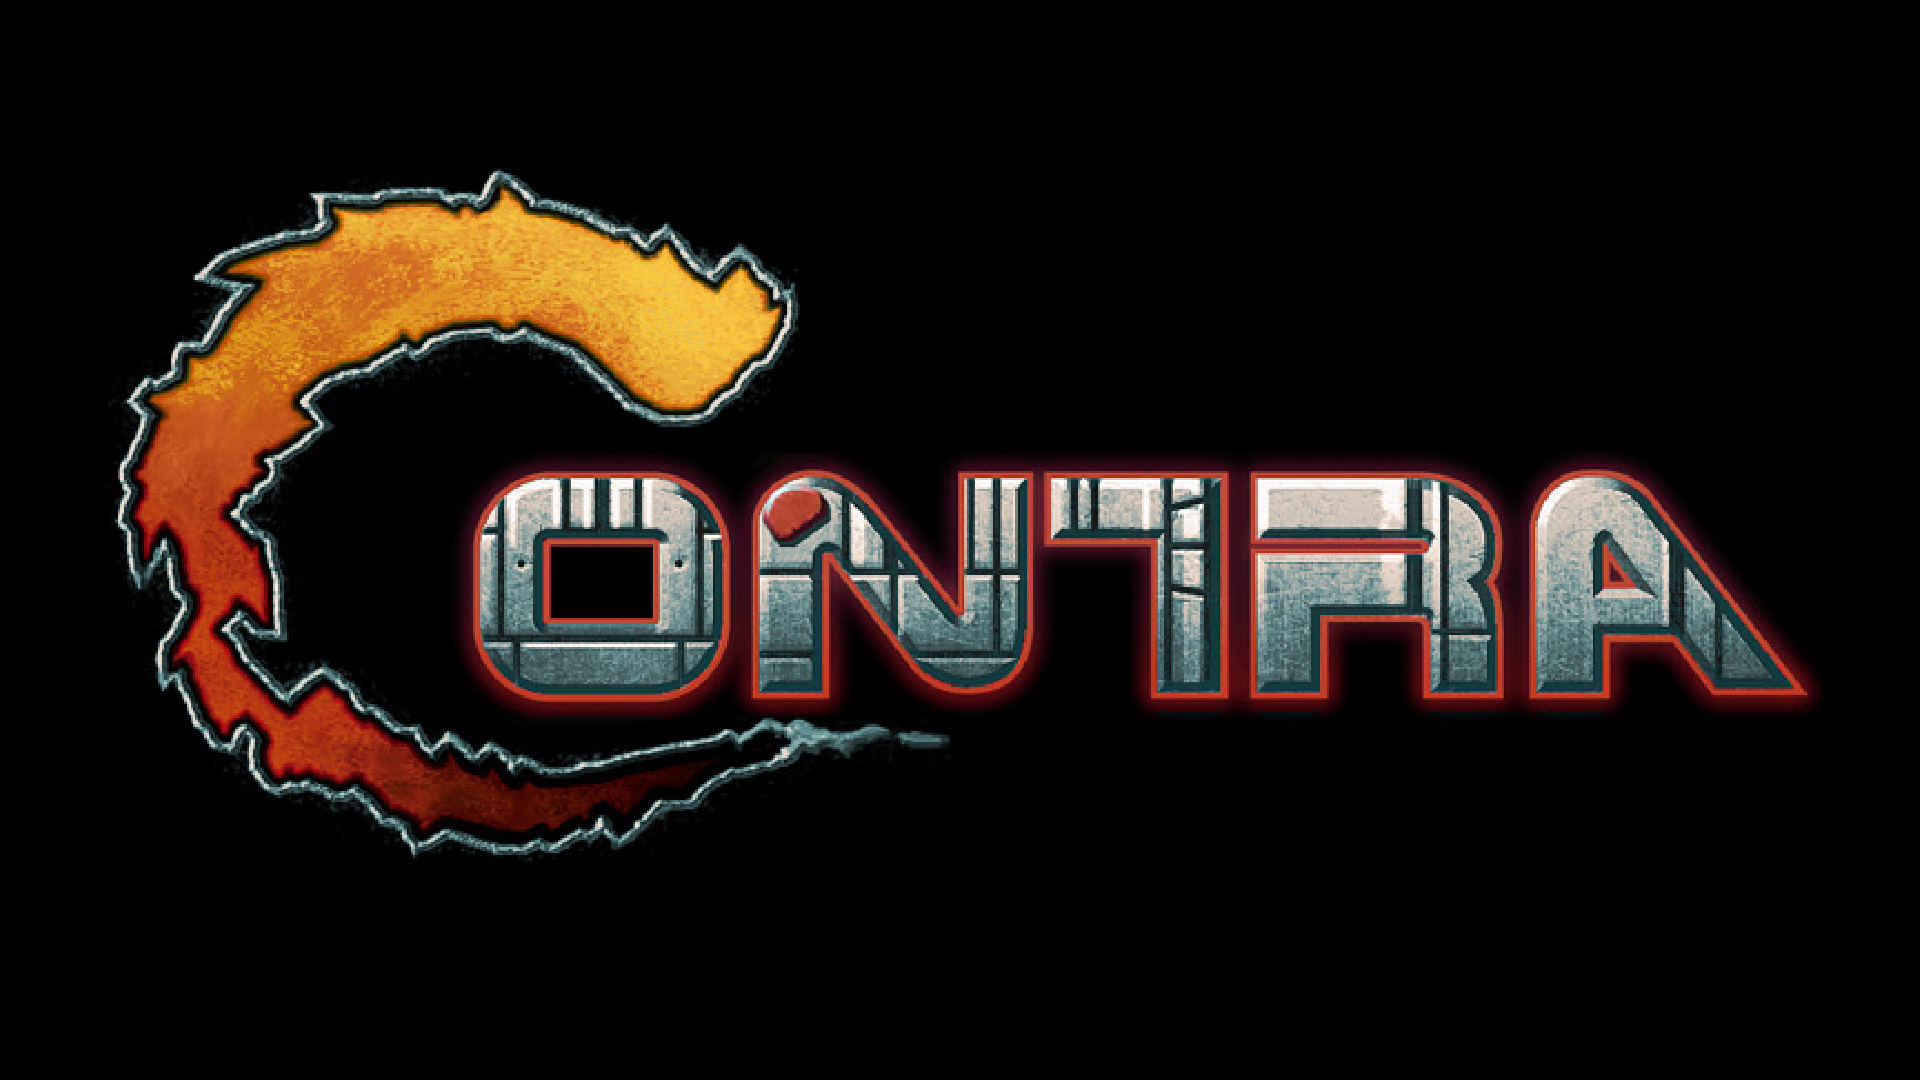 General 1920x1080 video games contra retro games simple background black background logo